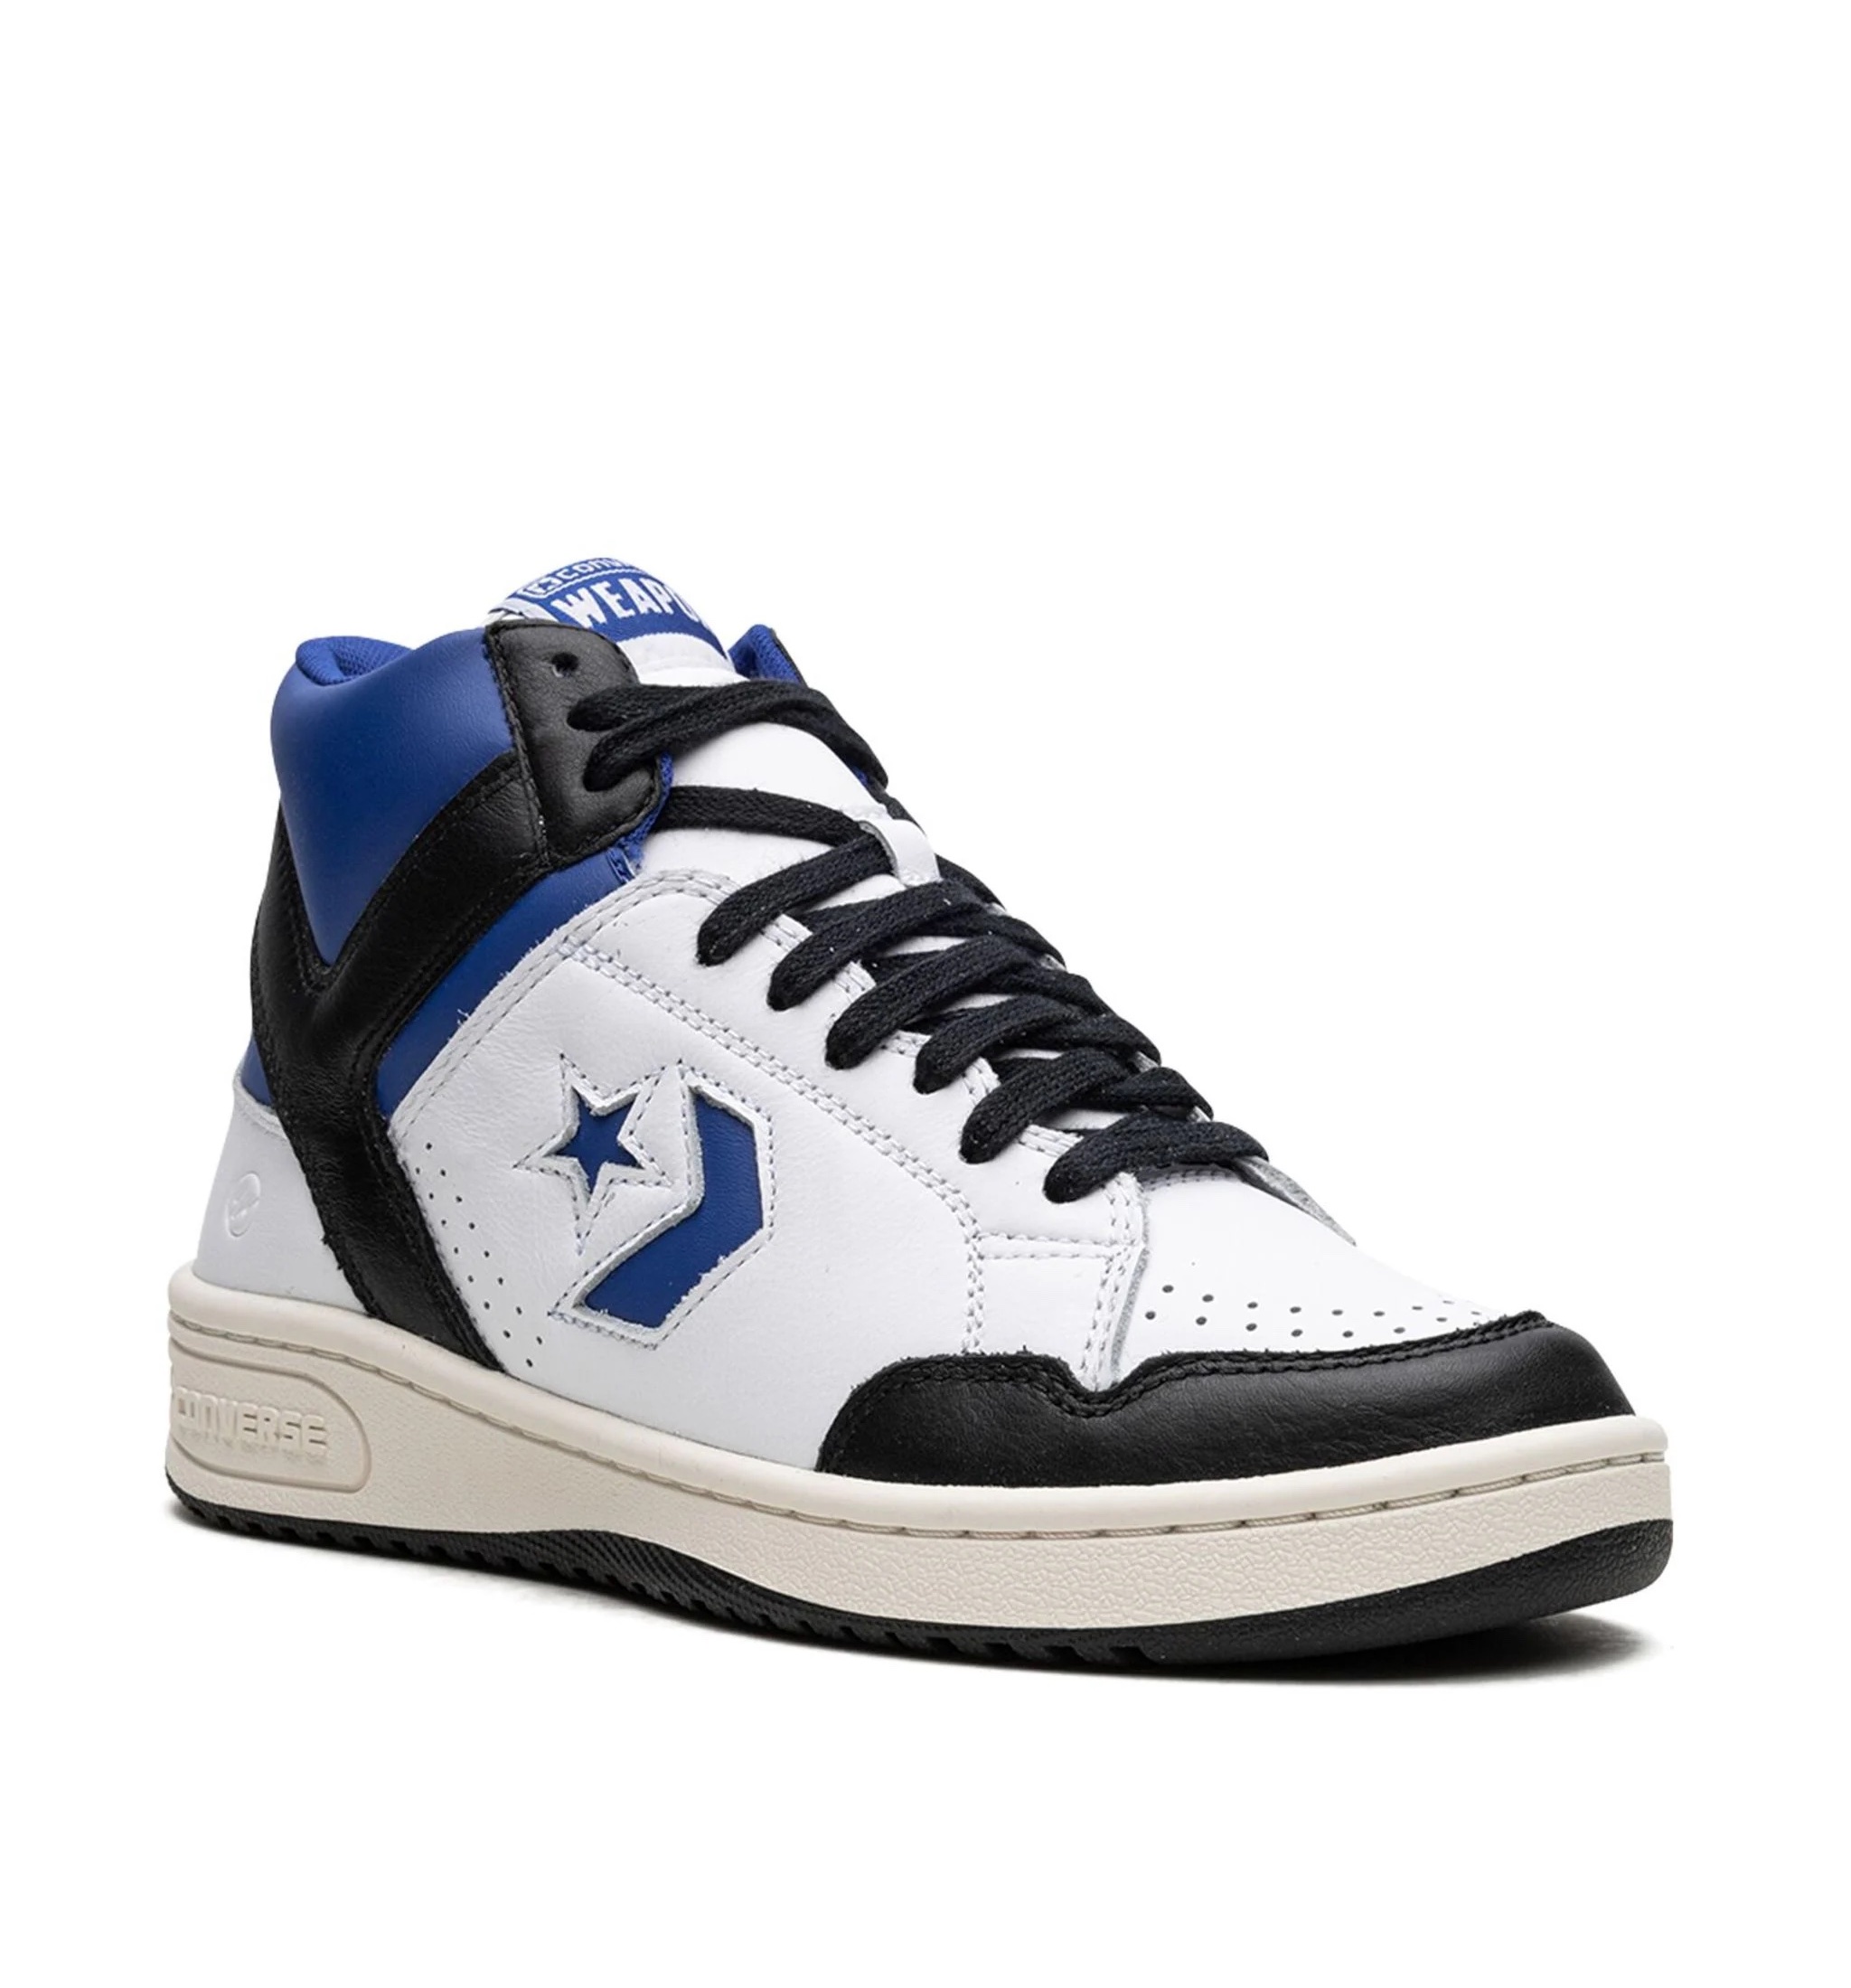 Converse x Fragment Design Weapon sneakers